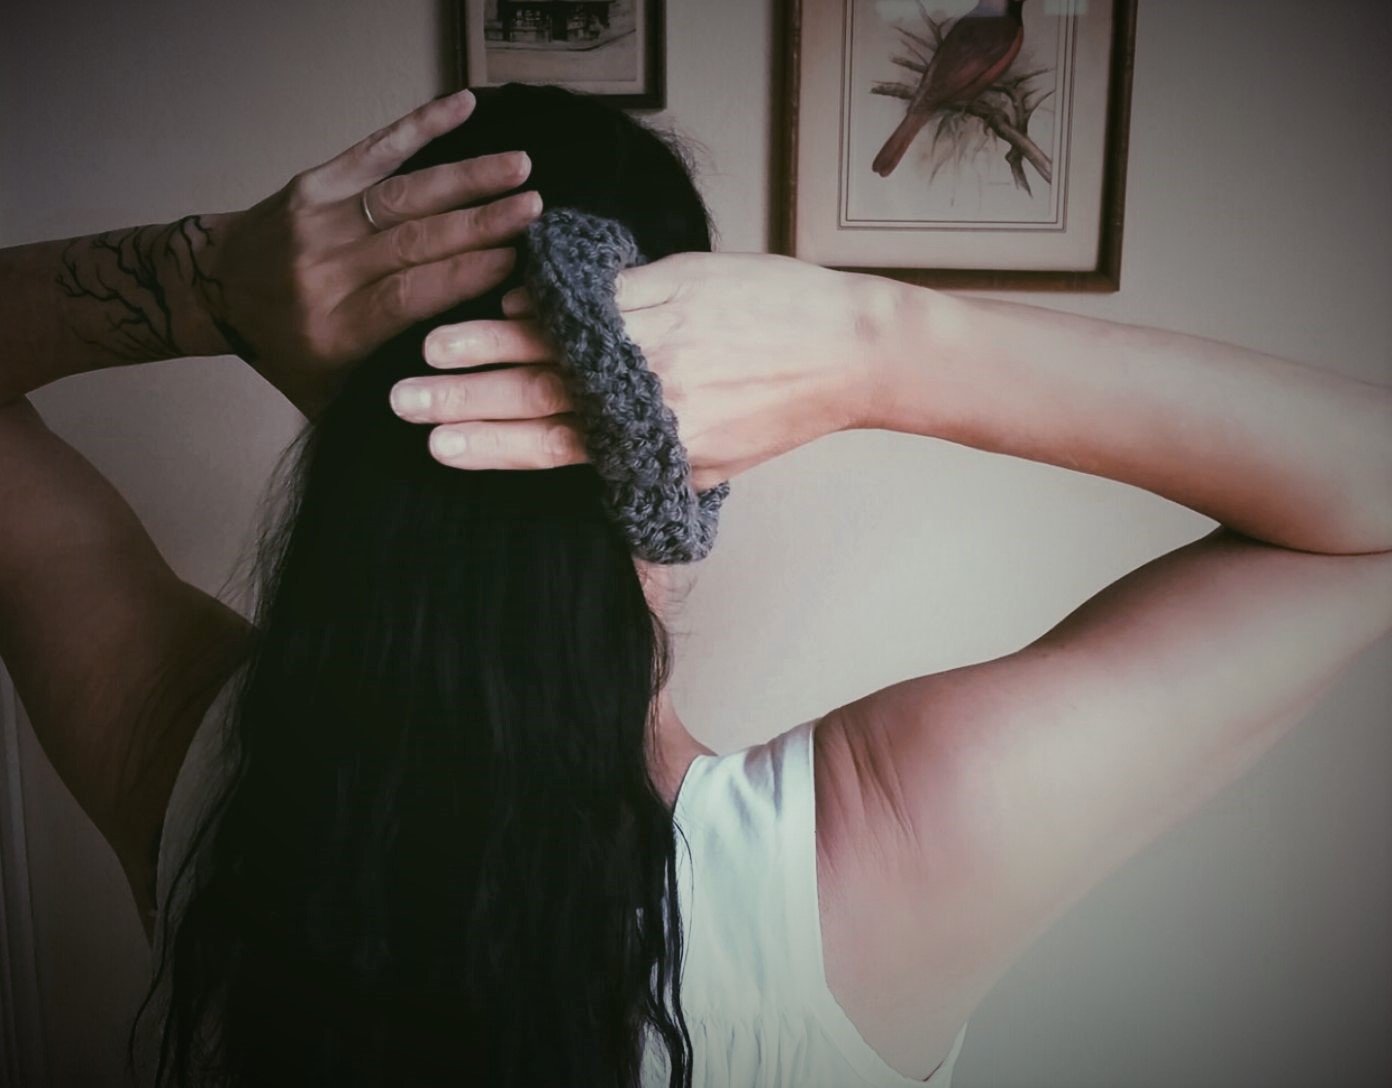 Handknit Gray Hair Scrunchie in Stormcloud, For Thick Hair